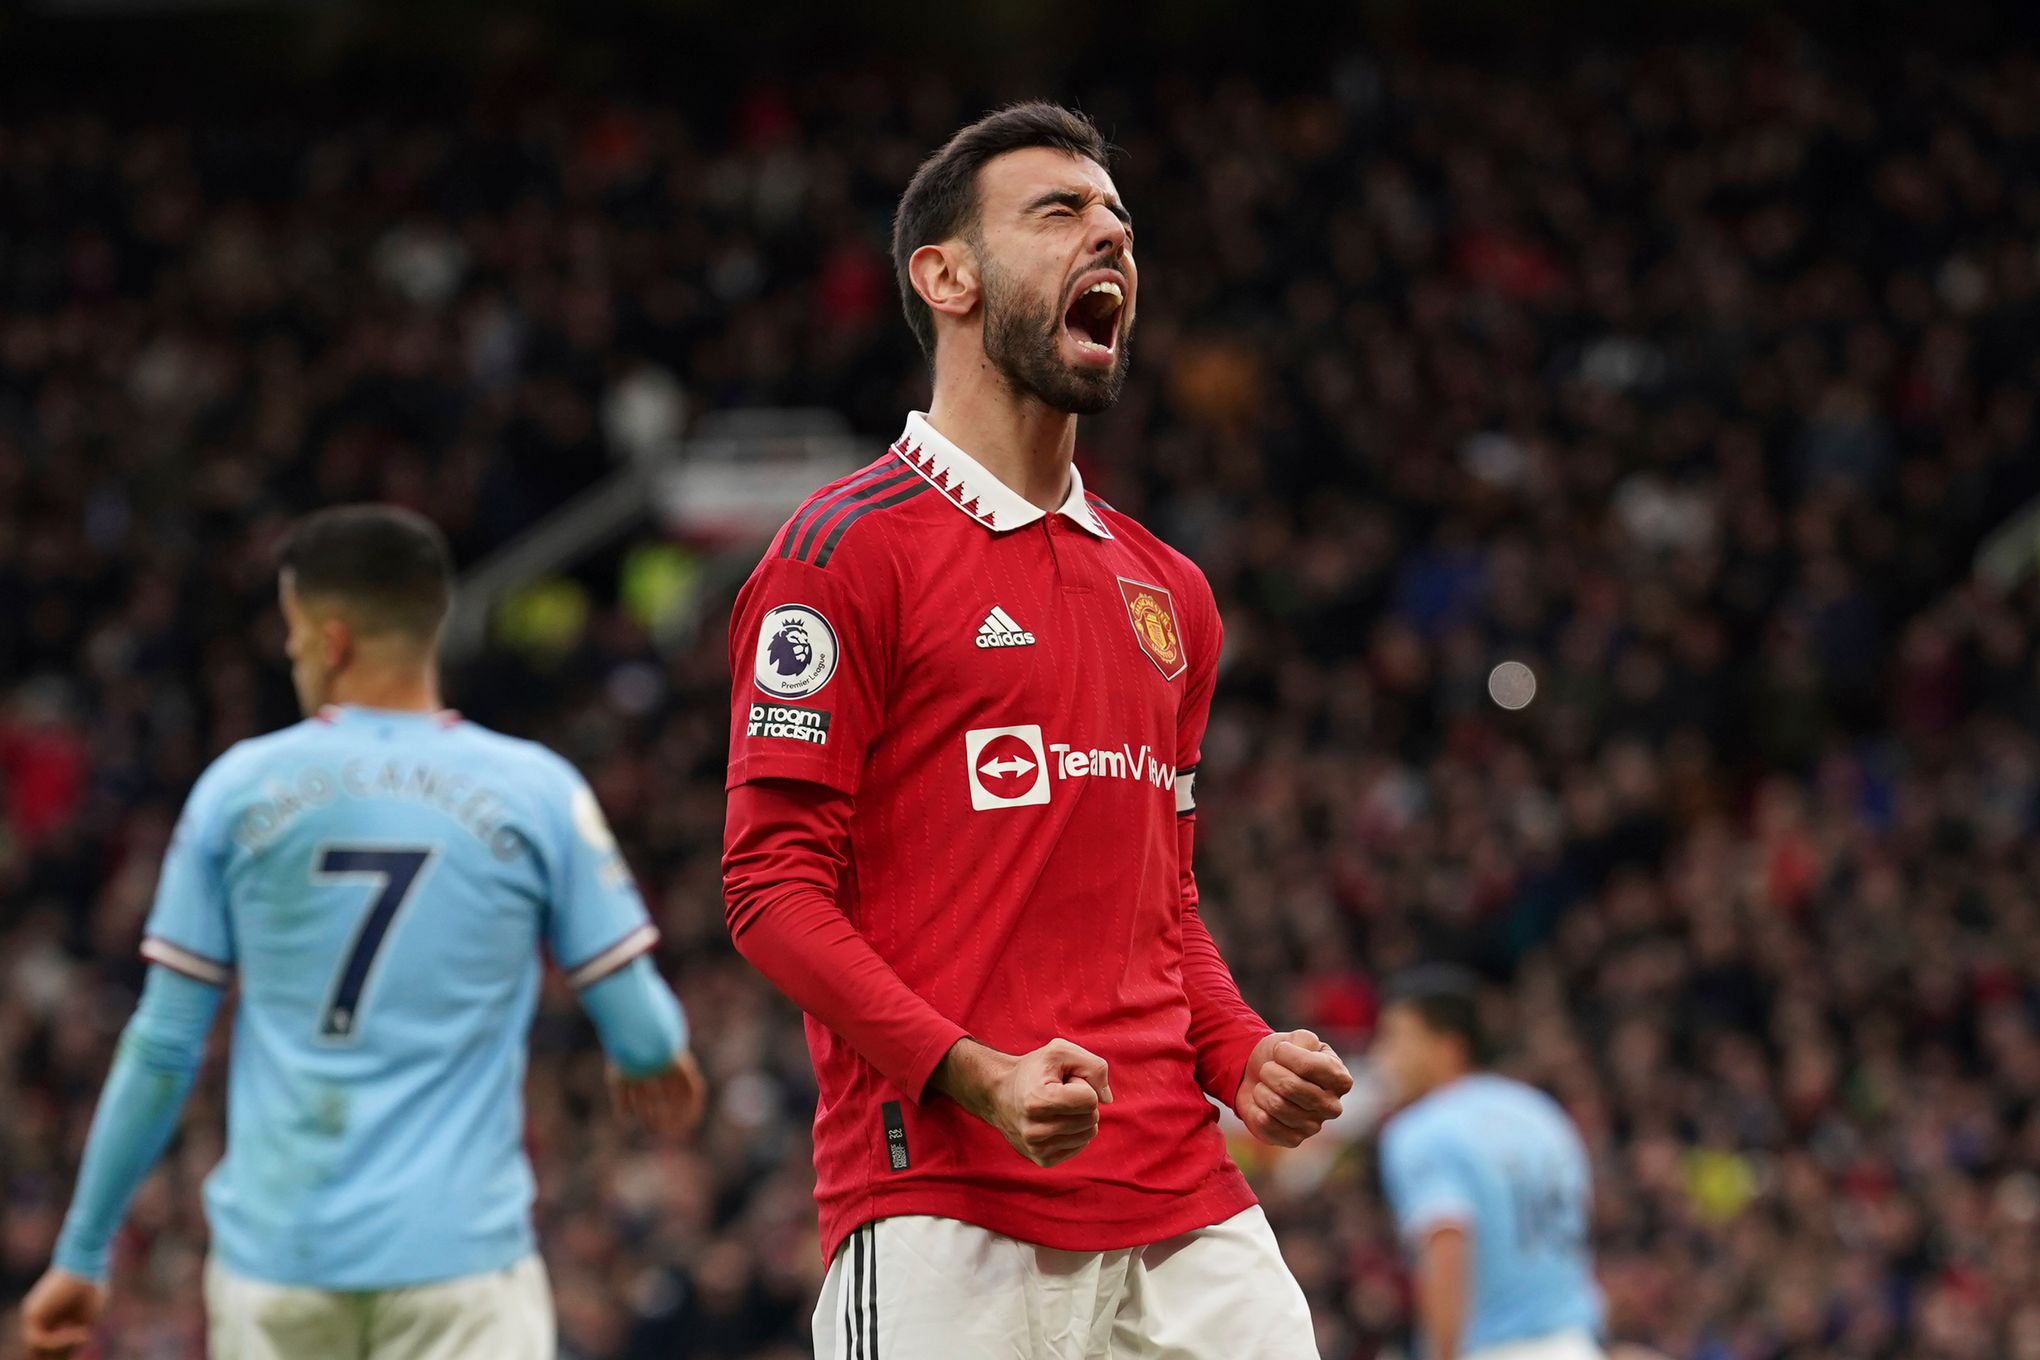 Manchester City vs Manchester United 2-1 – as it happened